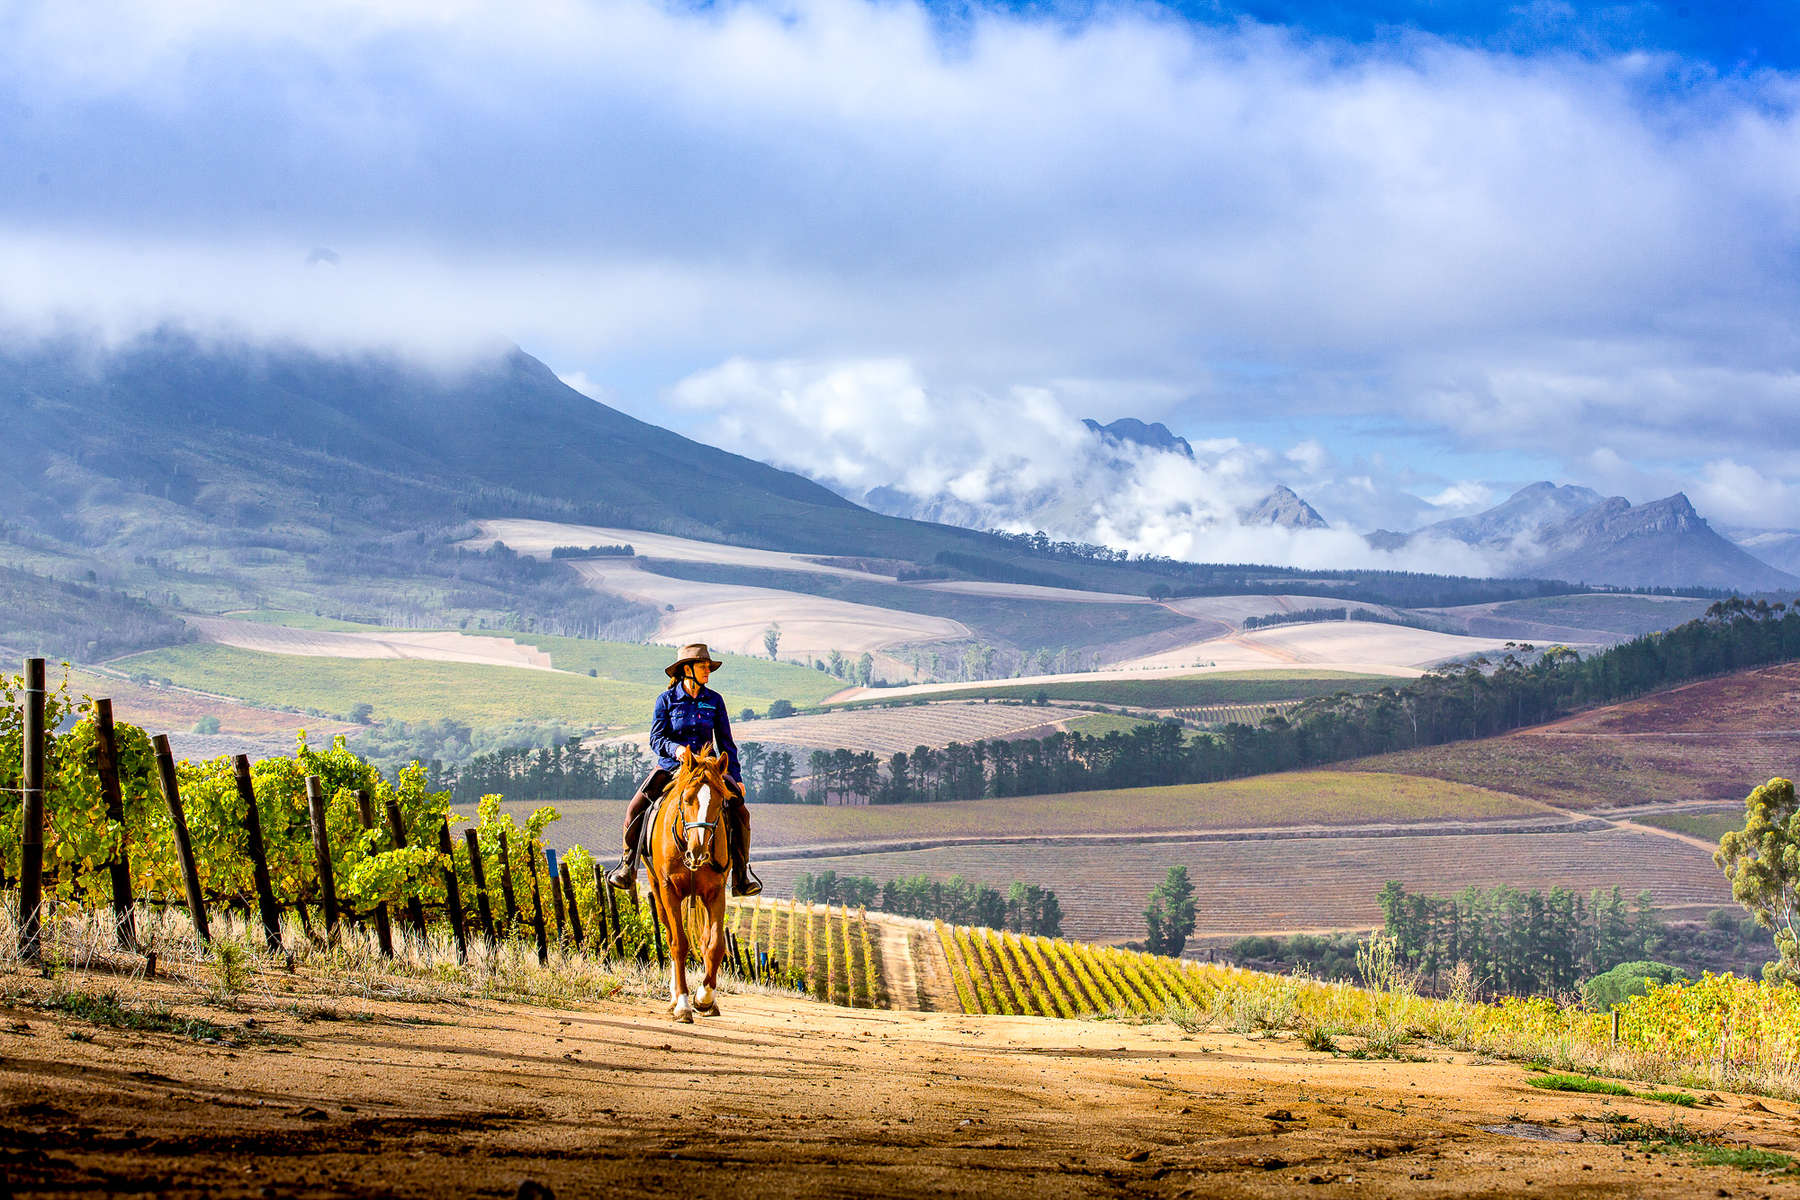 Riding against the backgdrop of the winelands mountains